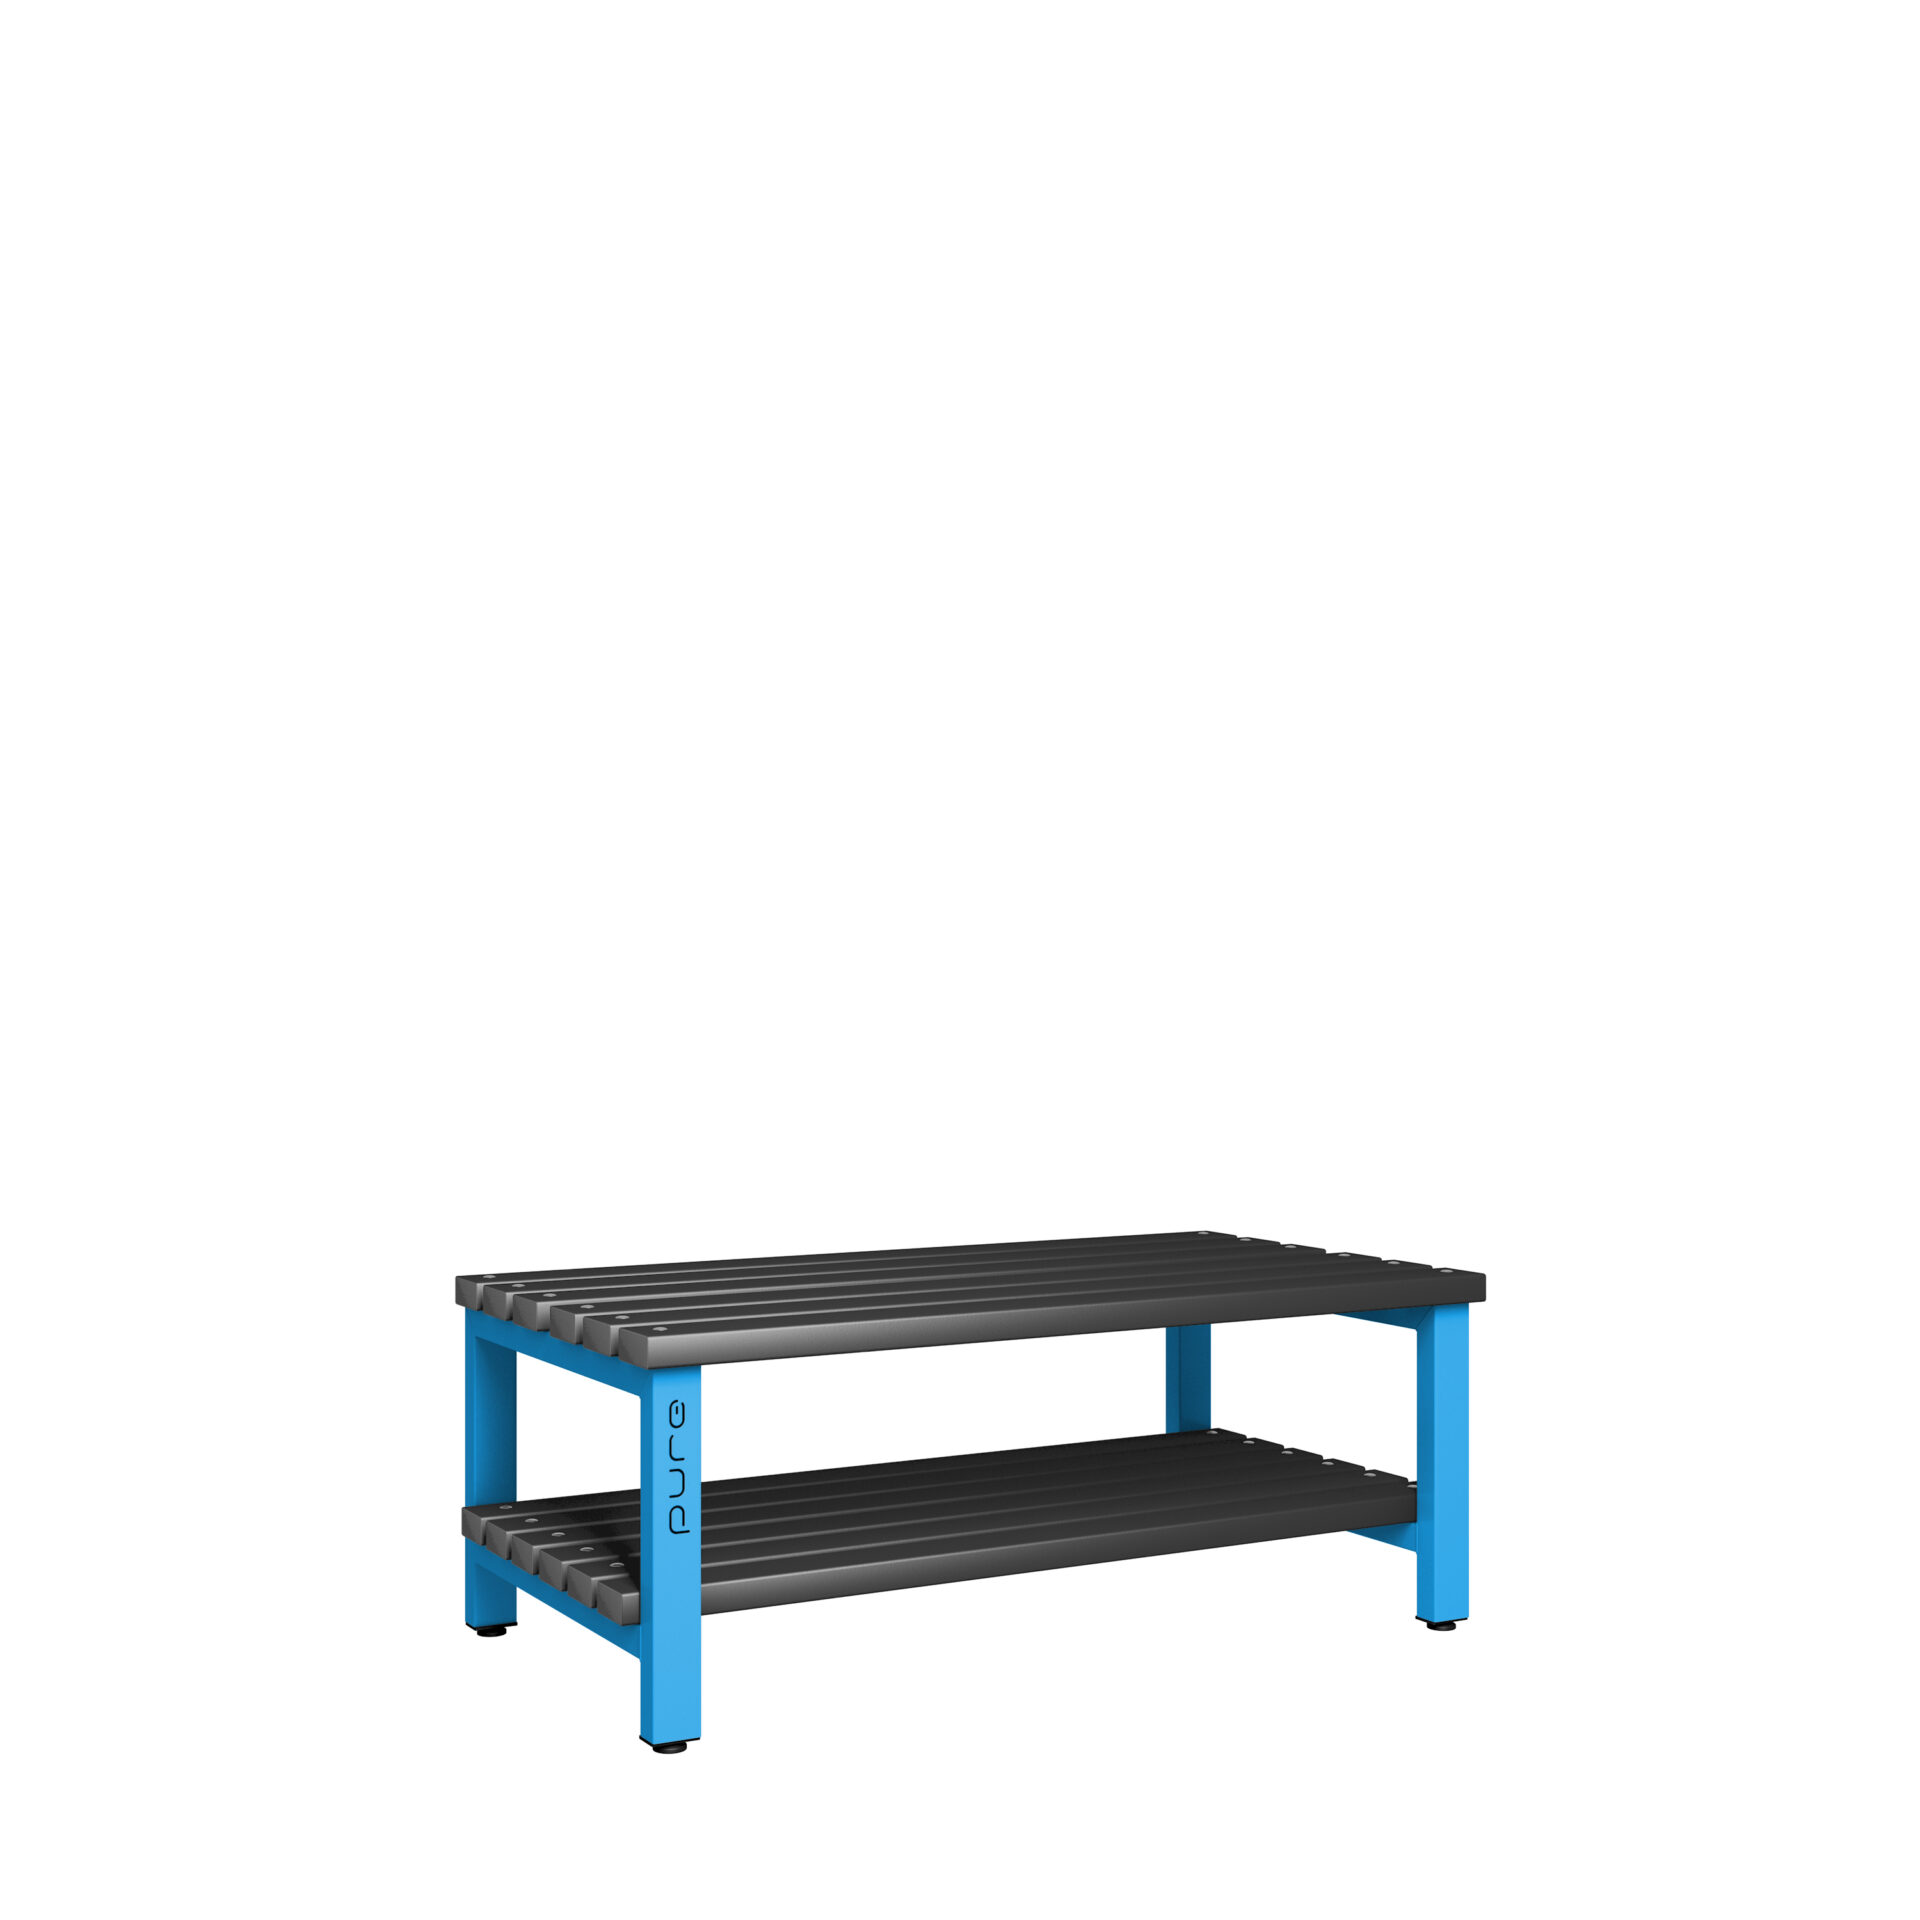 Pure Carbon Zero Double Sided 1200mm Standard Bench With Shoe Shelf - Cornflower Blue / Black Polymer